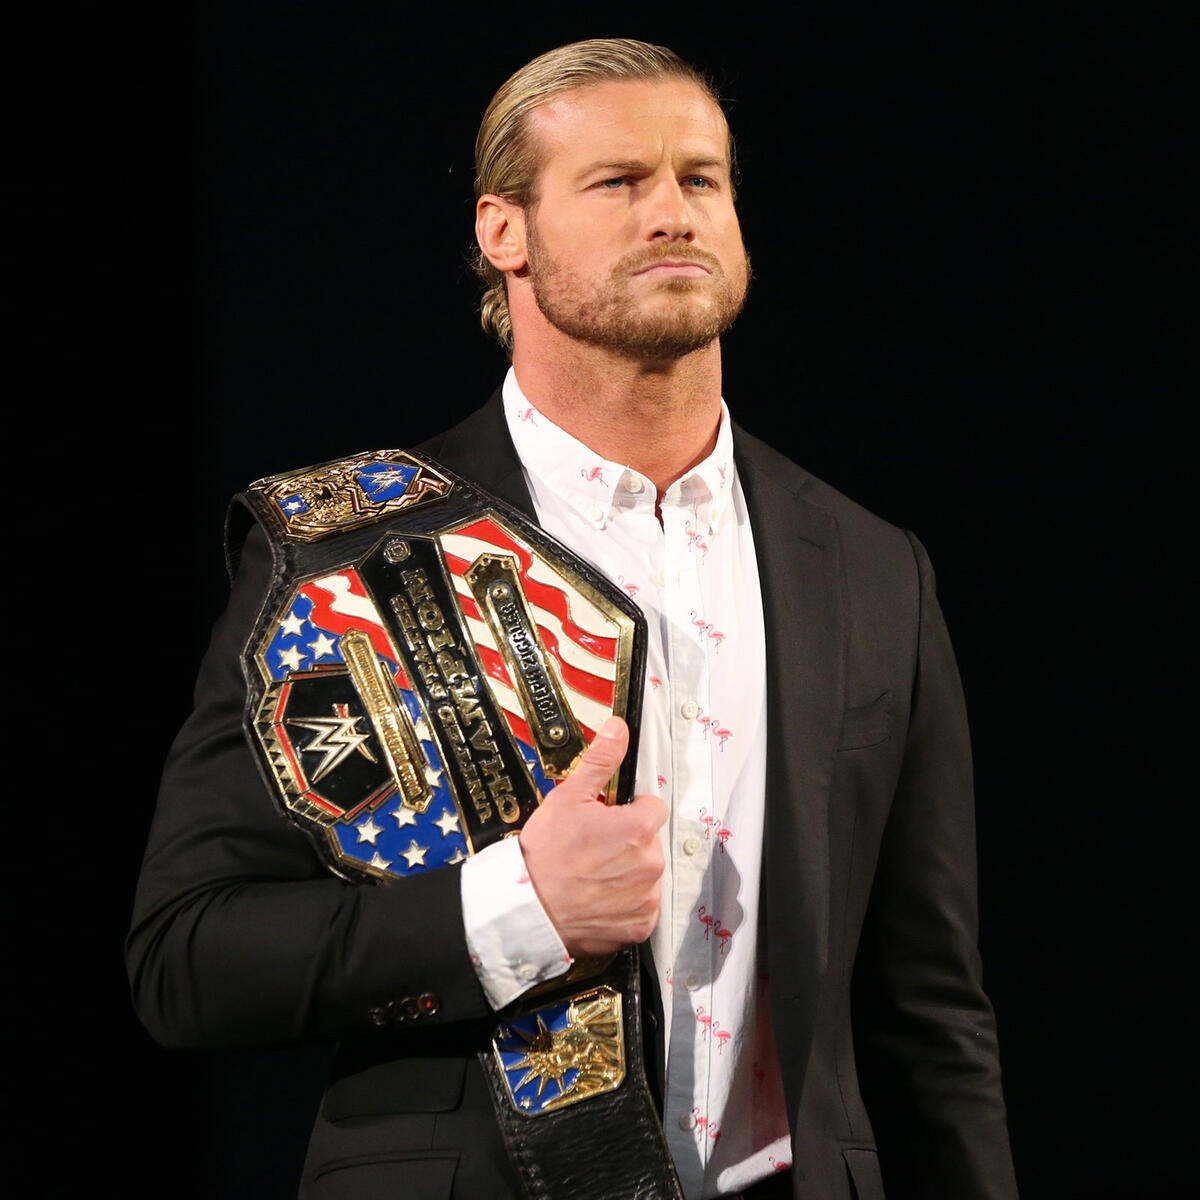 New United States Champion Dolph Ziggler makes his way to the squared circle.